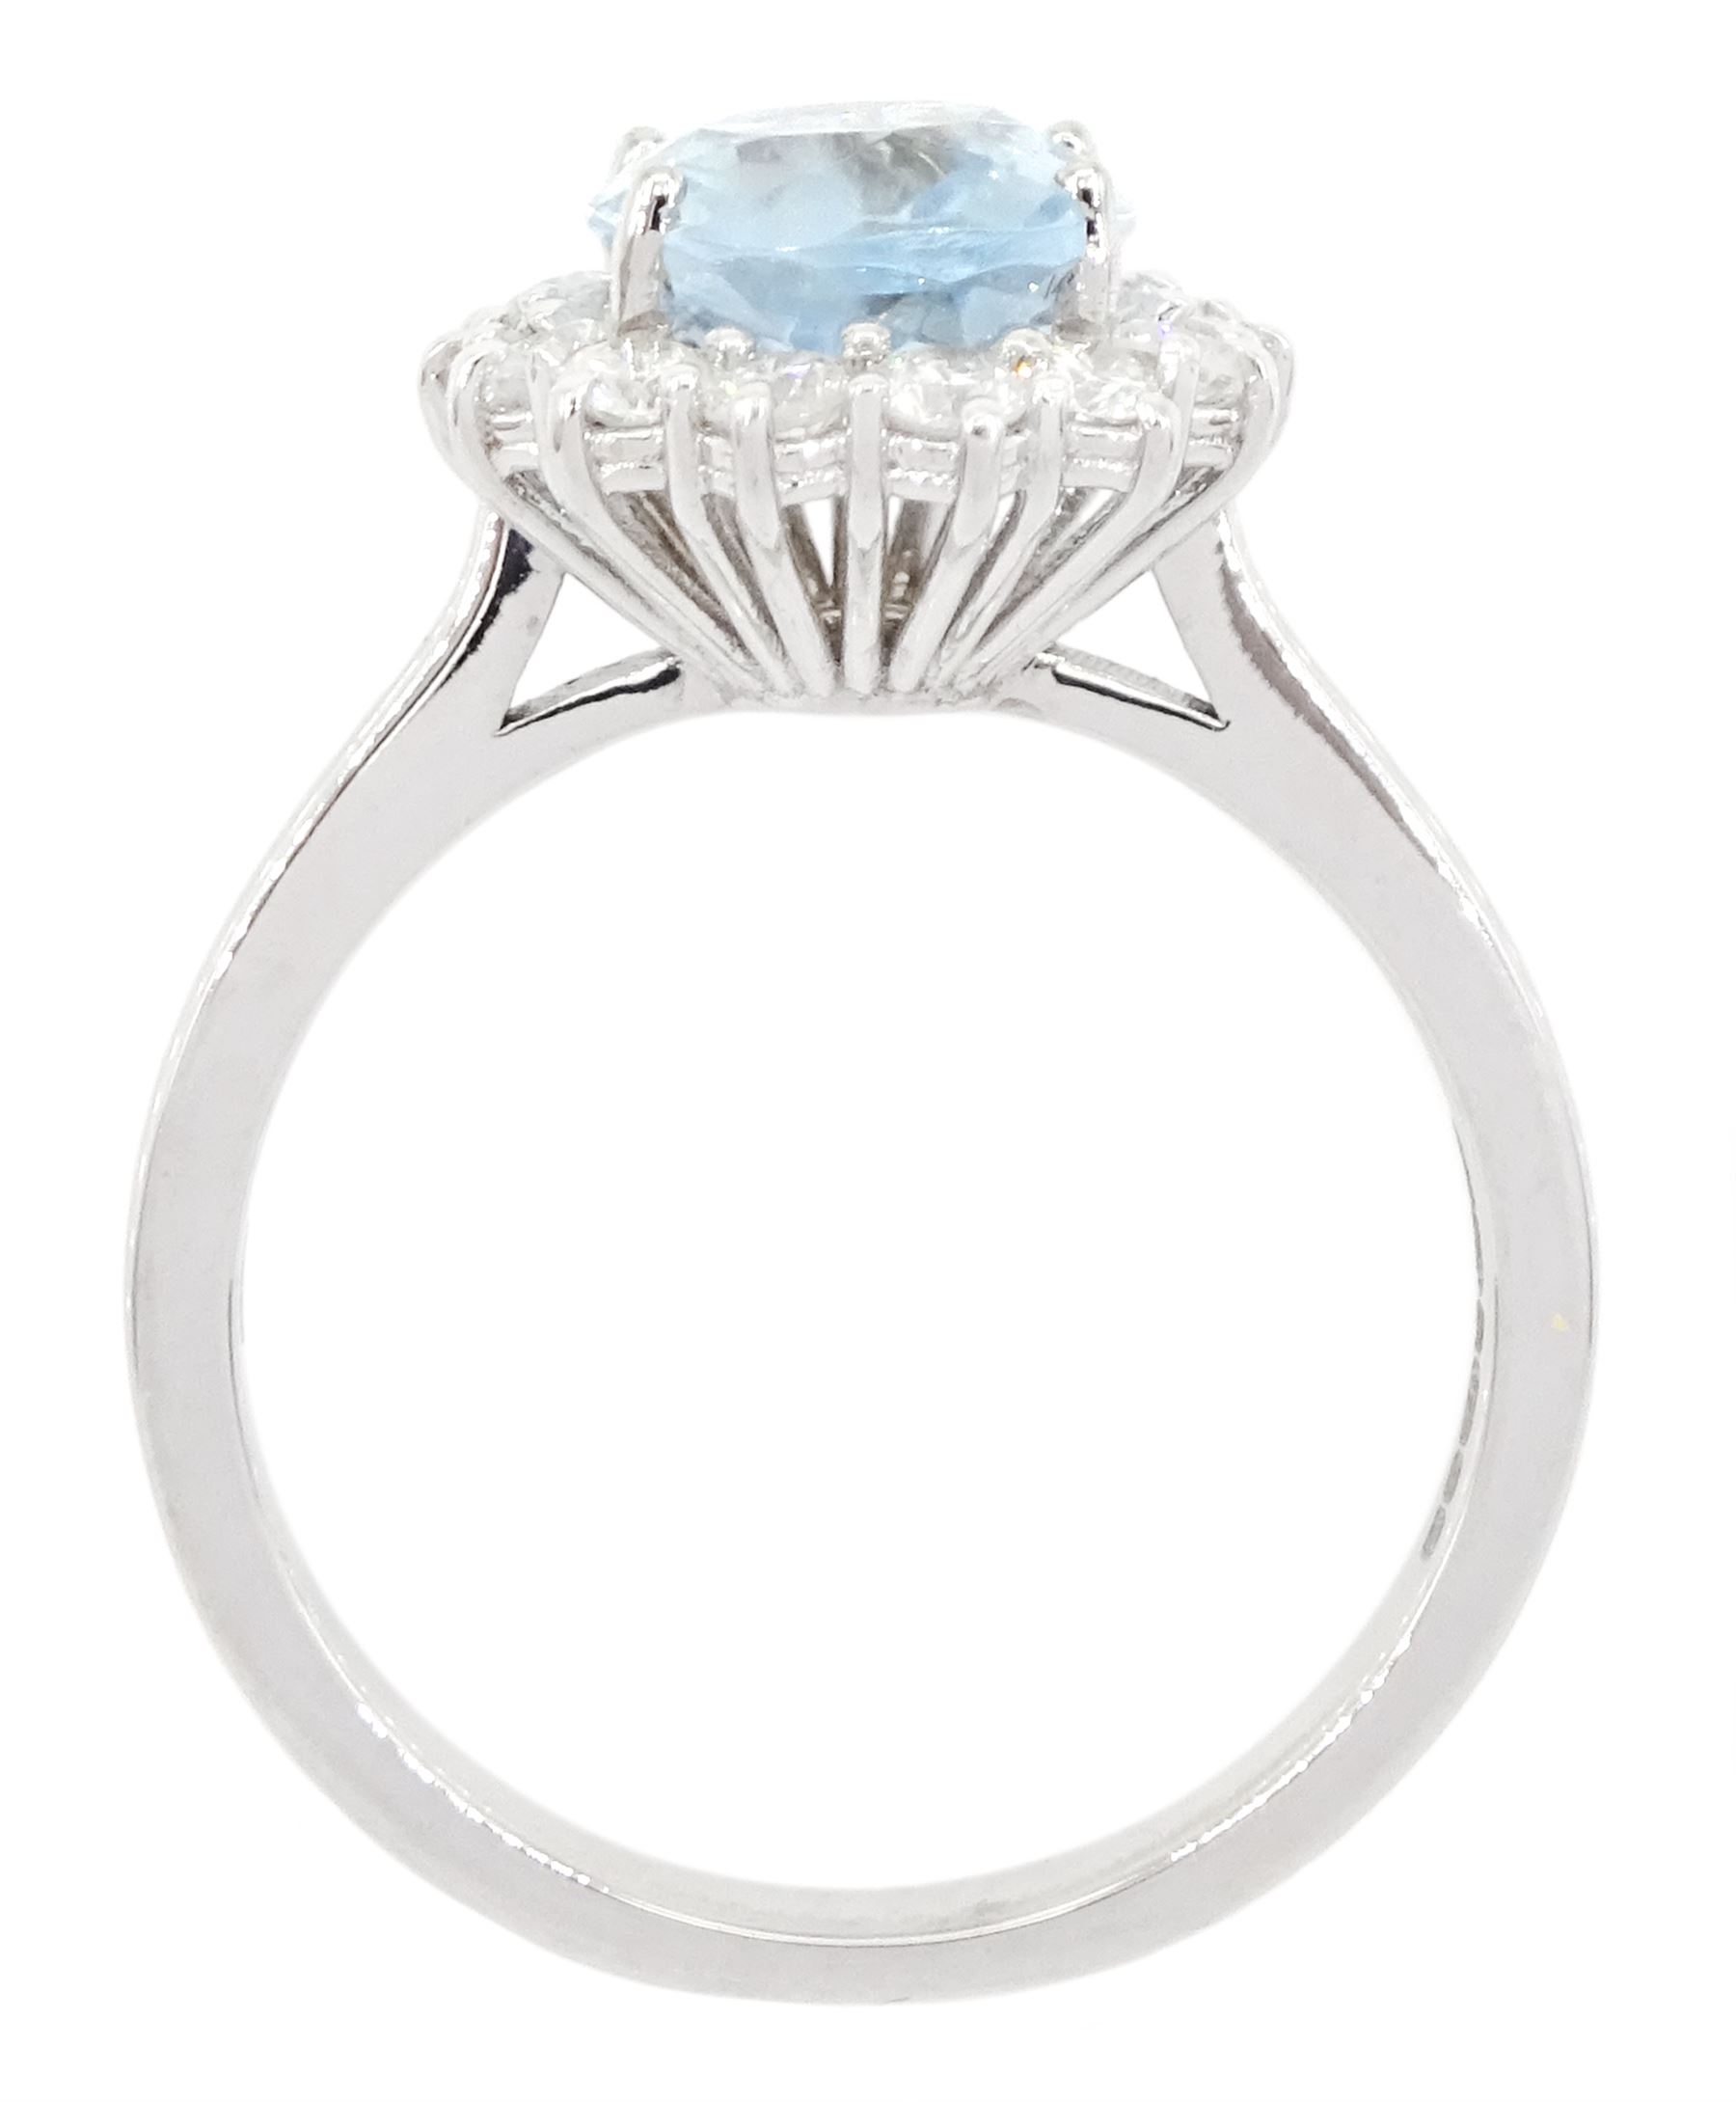 18ct white gold oval cut aquamarine and round brilliant cut diamond cluster ring - Image 4 of 4